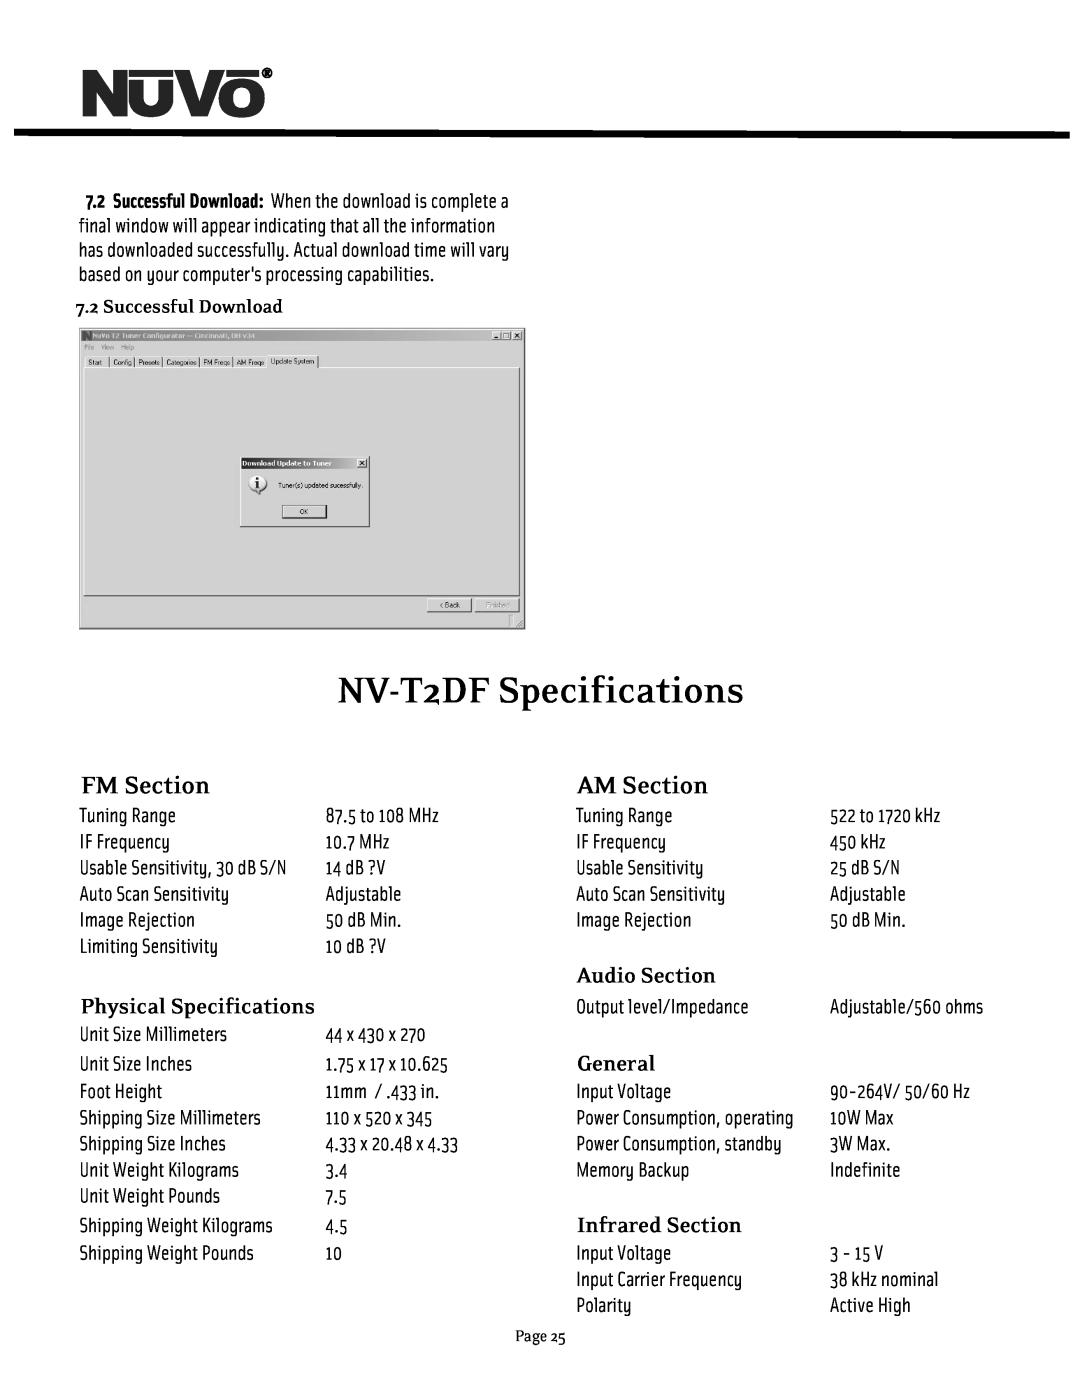 Nuvo NV-T2DF manual FM Section, AM Section, Audio Section, General, Infrared Section, 7.2Successful Download 